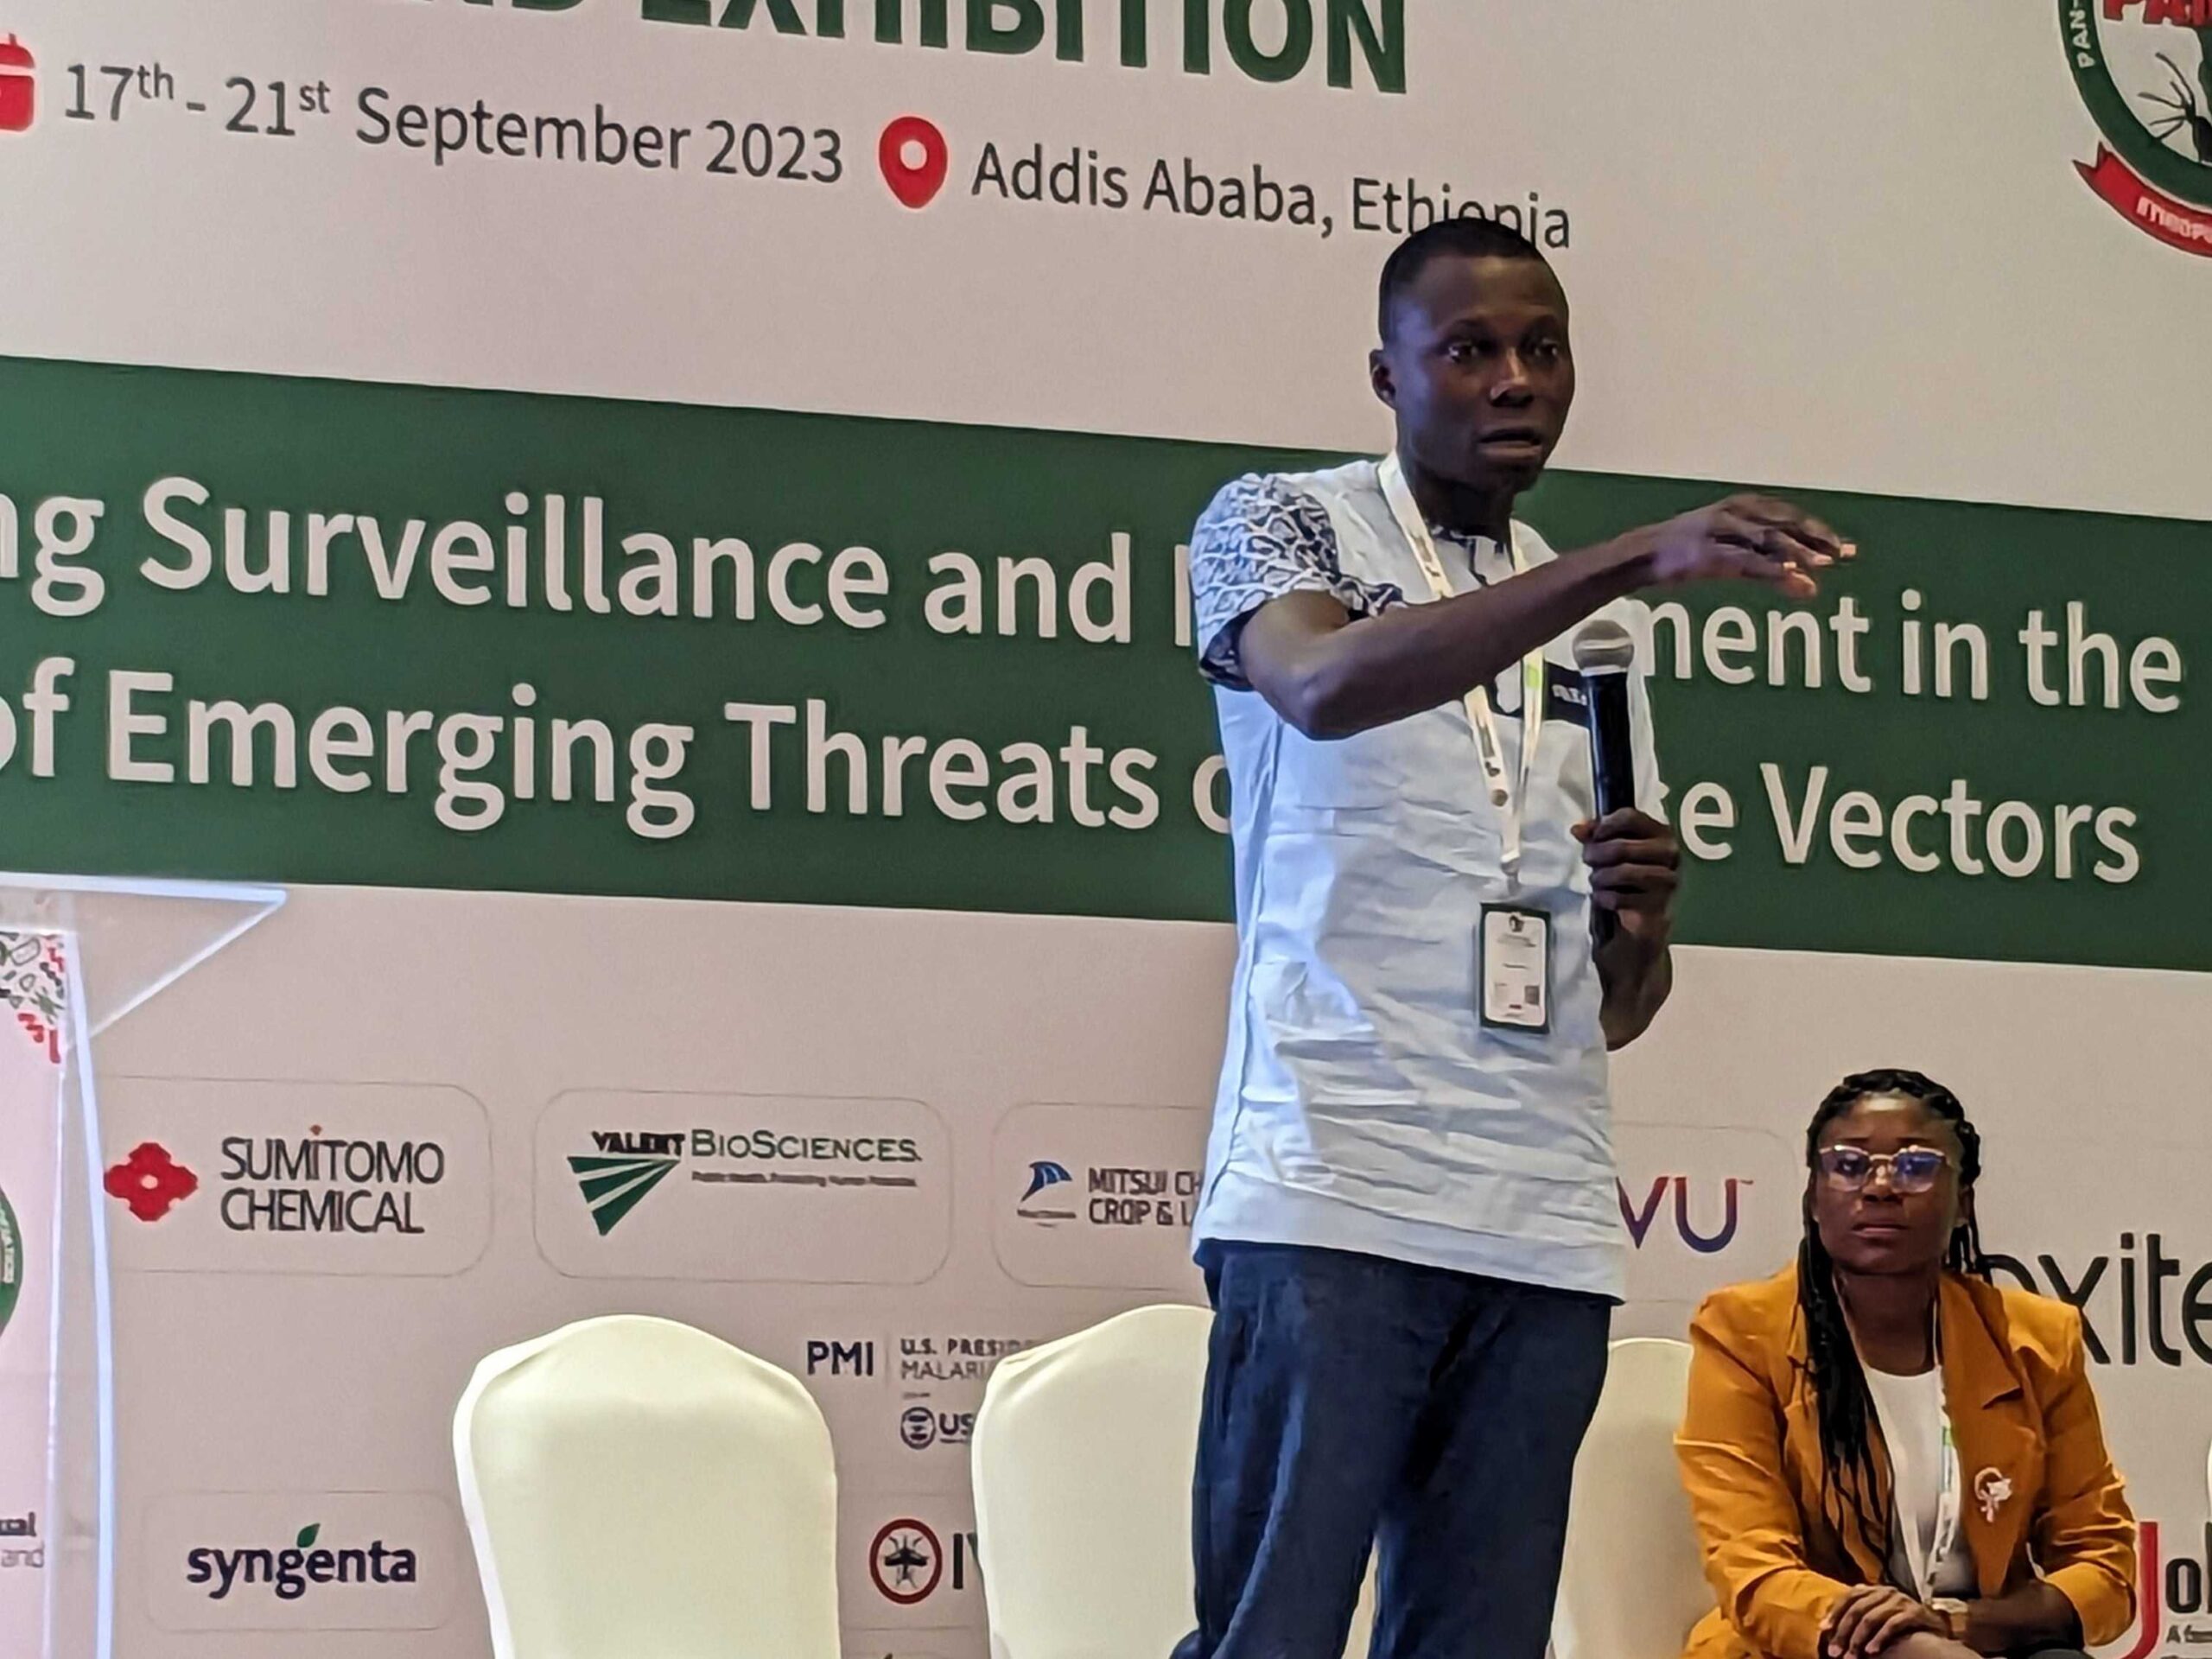 Mahamadi Kientega, a PhD student researching insecticide resistance in malaria mosquitoes in Burkina Faso, presents at the PAMCA 9th Annual Conference